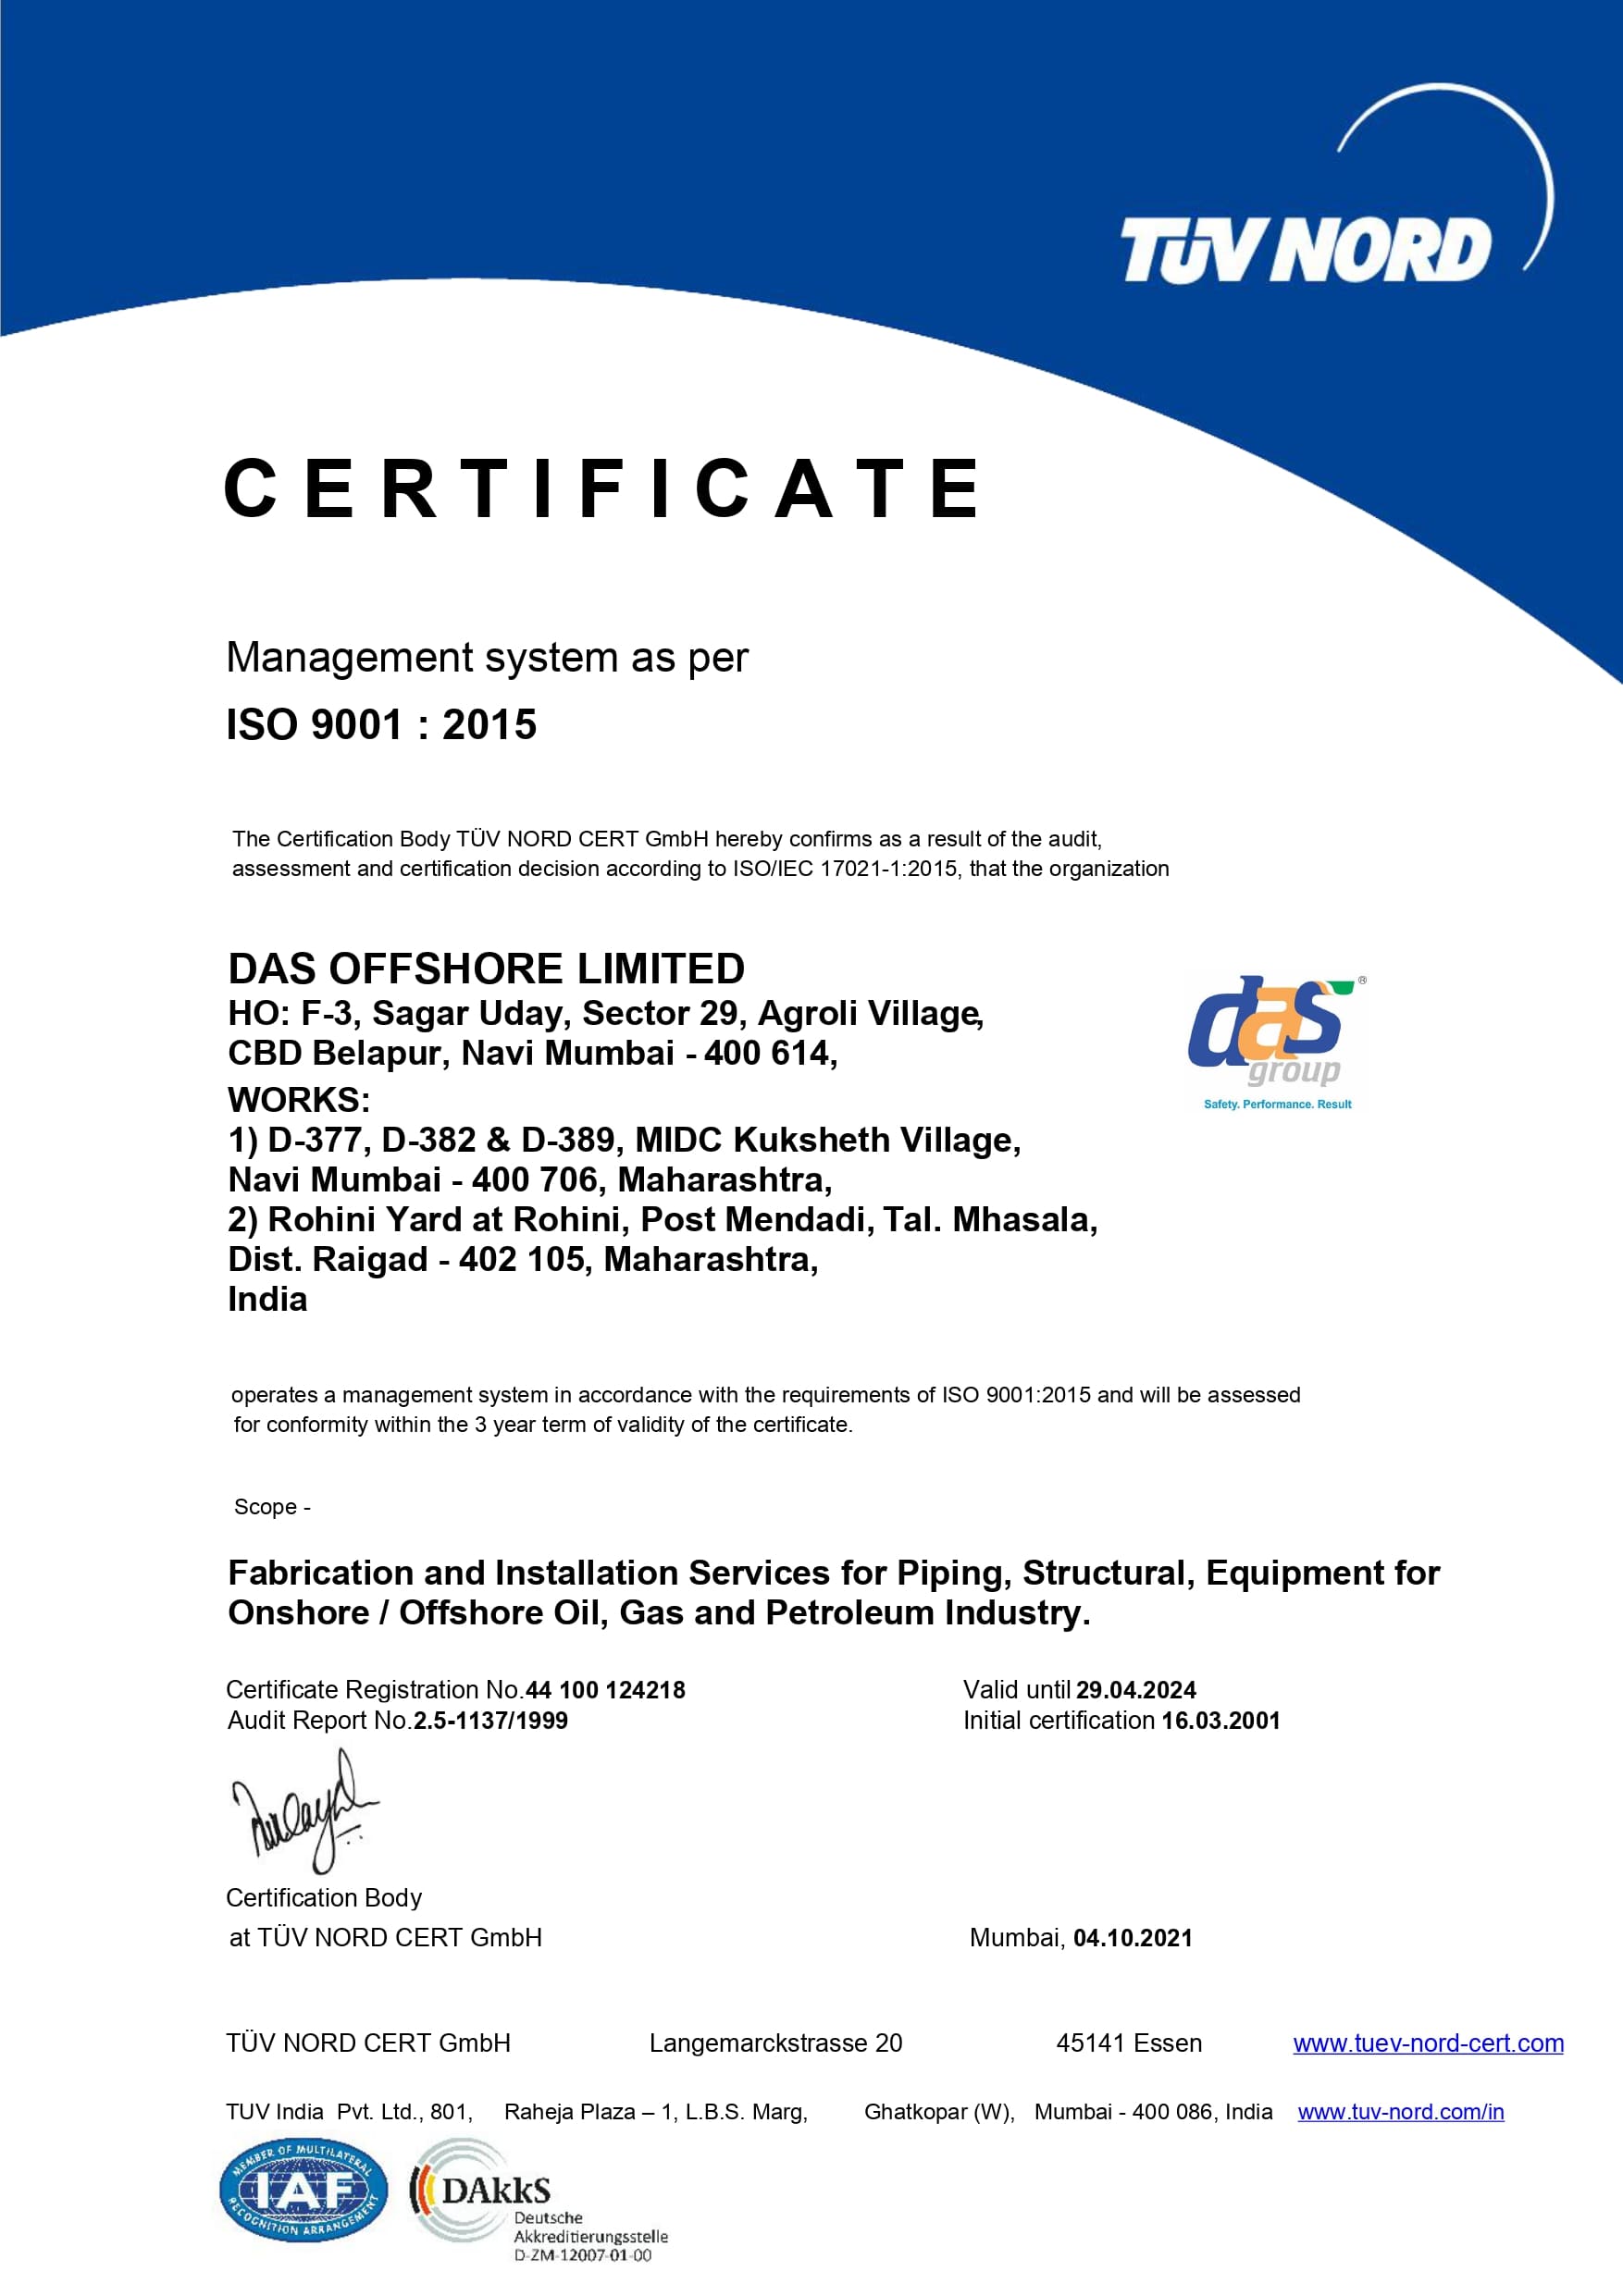 Management system as per ISO 9001 : 2015